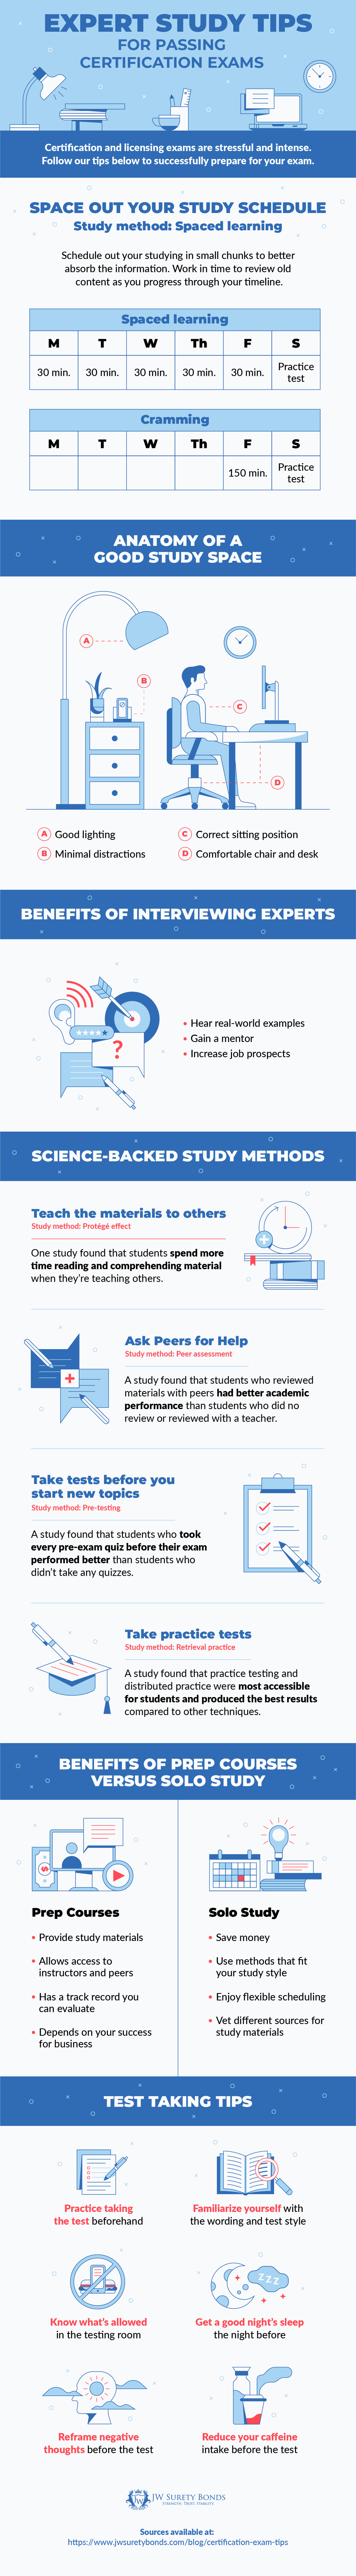 expert study tips for passing certification exams infographic